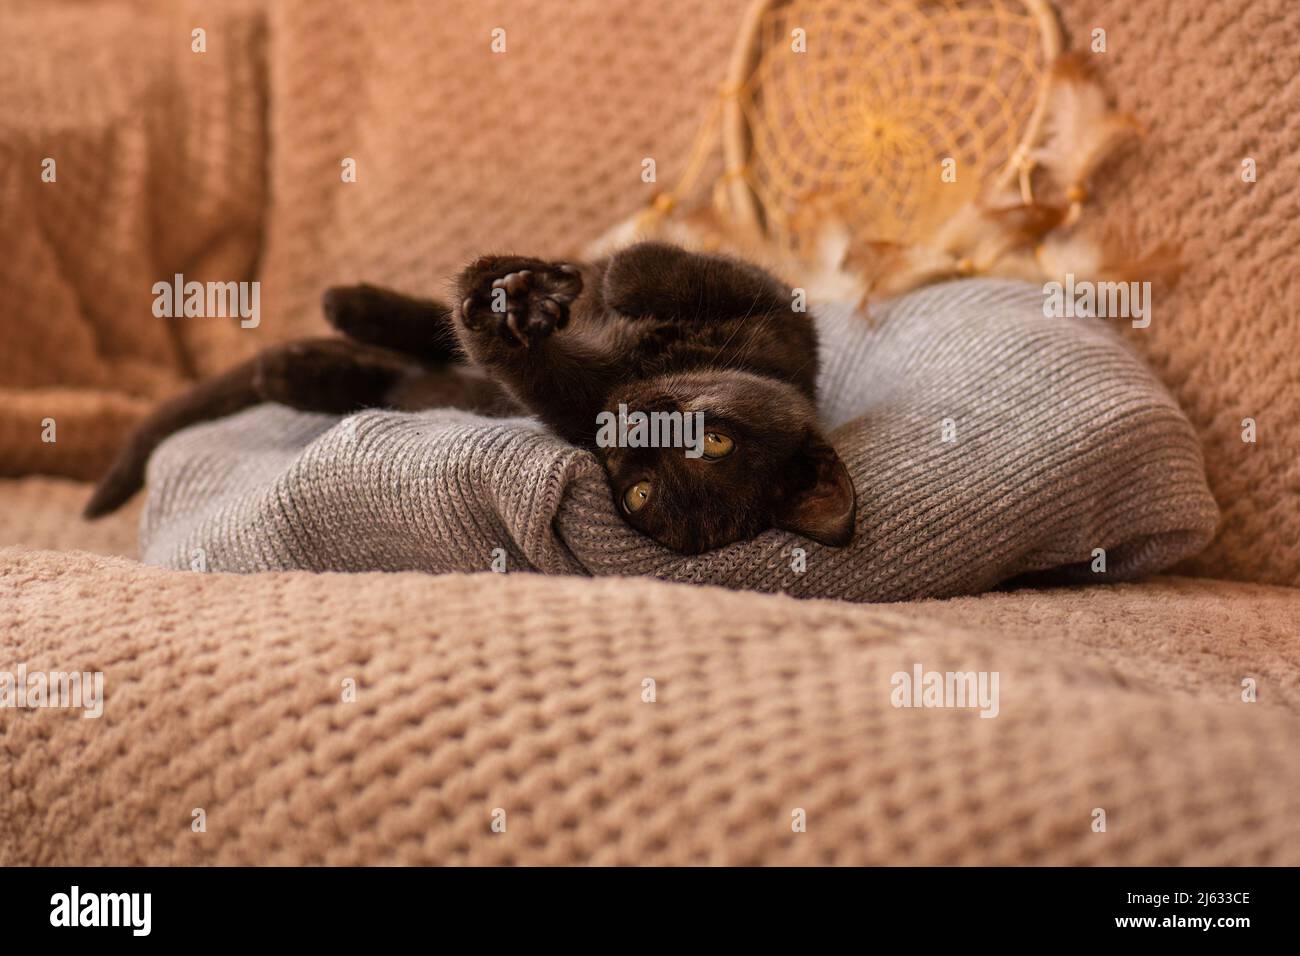 Perfect rest and relaxation concept. Cute  kitten resting on cushion in hygge home interior. Stock Photo